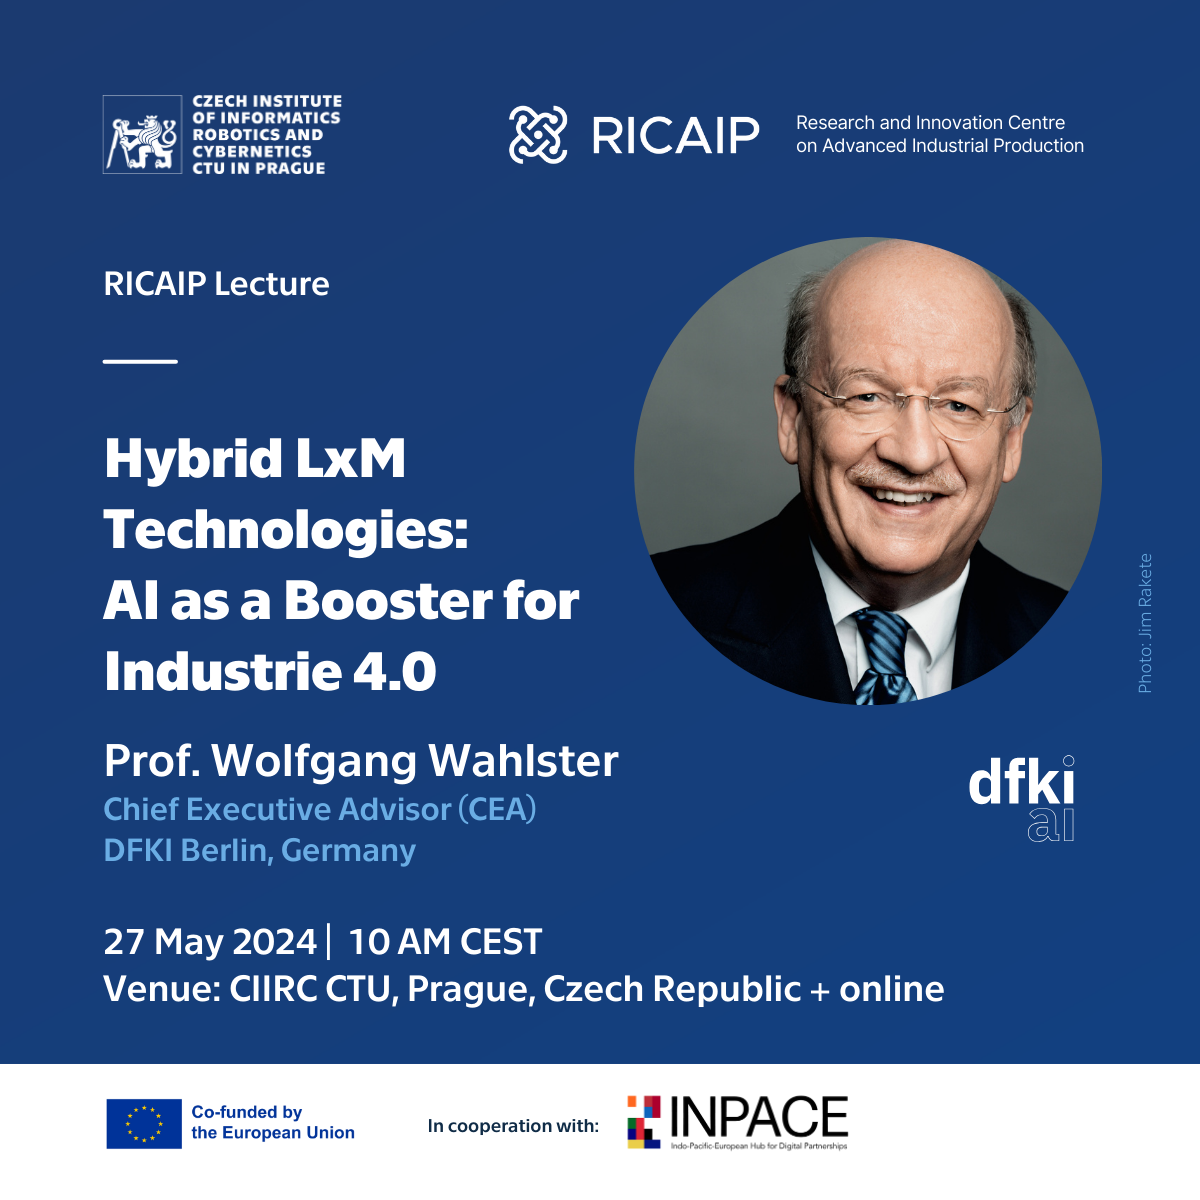 Prof. Wolfgang Wahlster - lecture - Hybrid LxM Technologies: AI as a Booster for Industrie 4.0